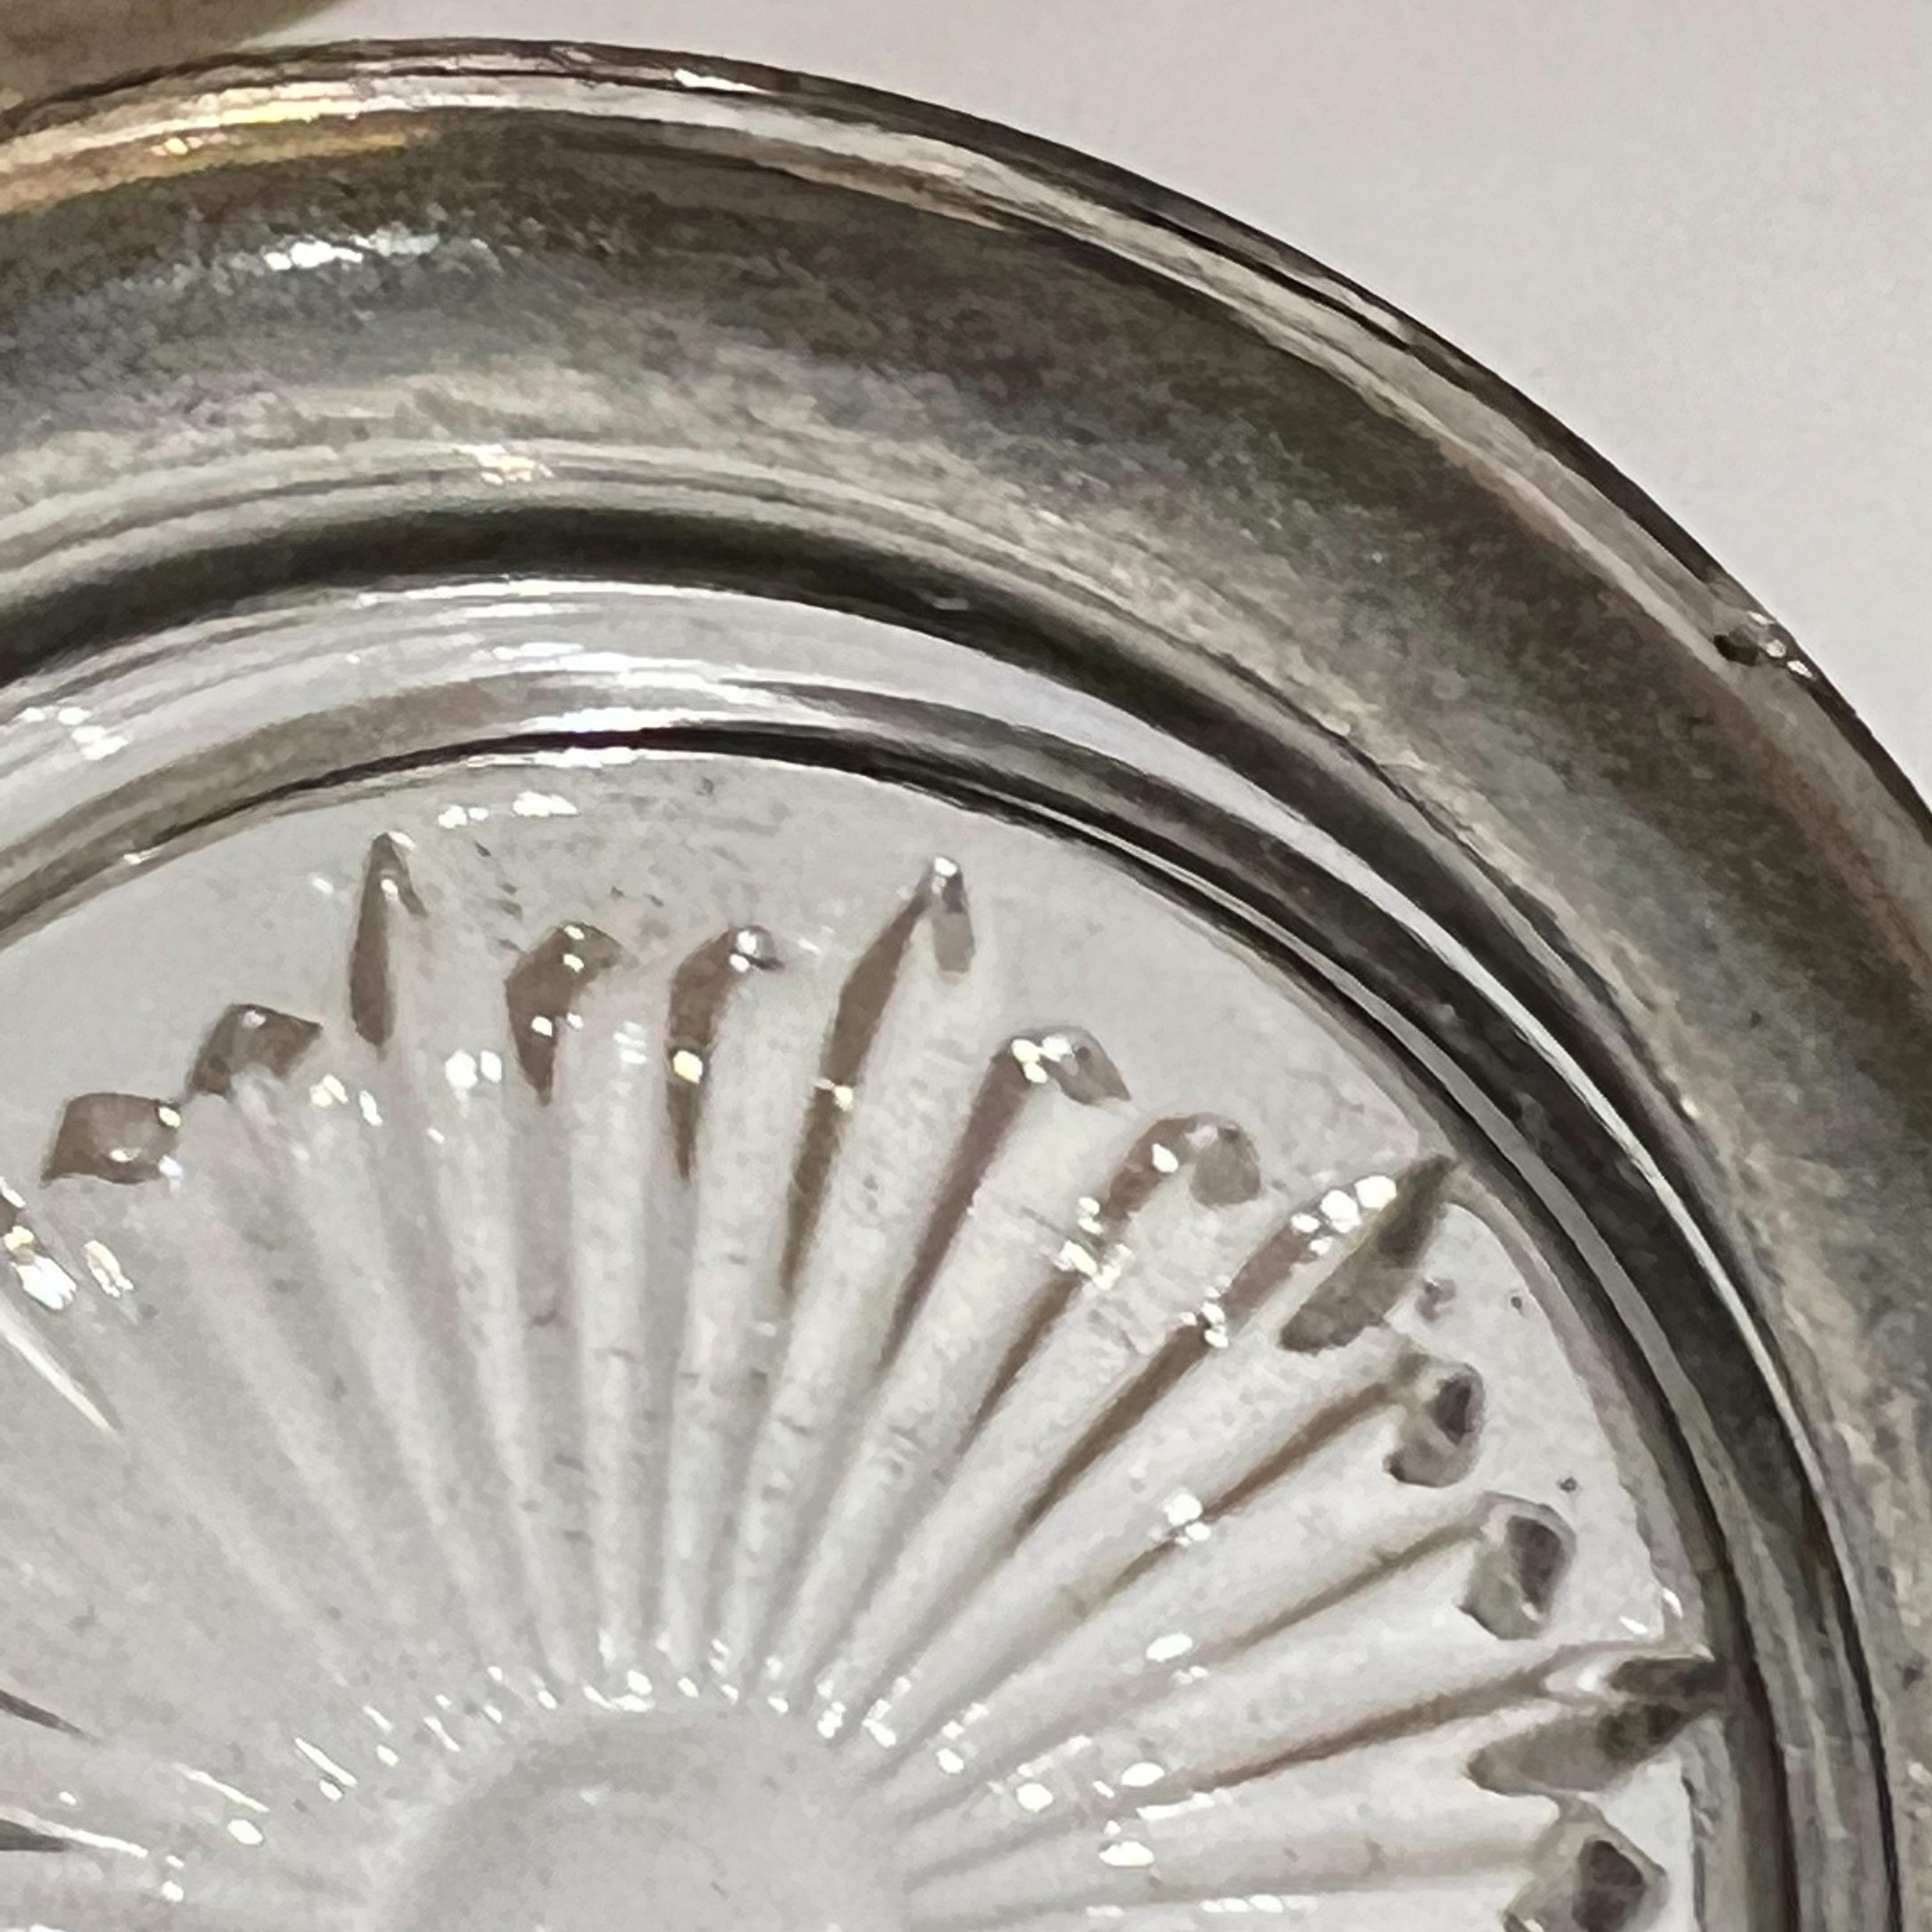 Italian glass ashtray 
1960 Leonard Italy Sunburst round ashtray coaster catchall jewelry tray in silverplate & crystal glass
No label, maker Leonard Italy
Measures: .75 tall x 4 diameter
Preowned original vintage condition unrestored.
See images